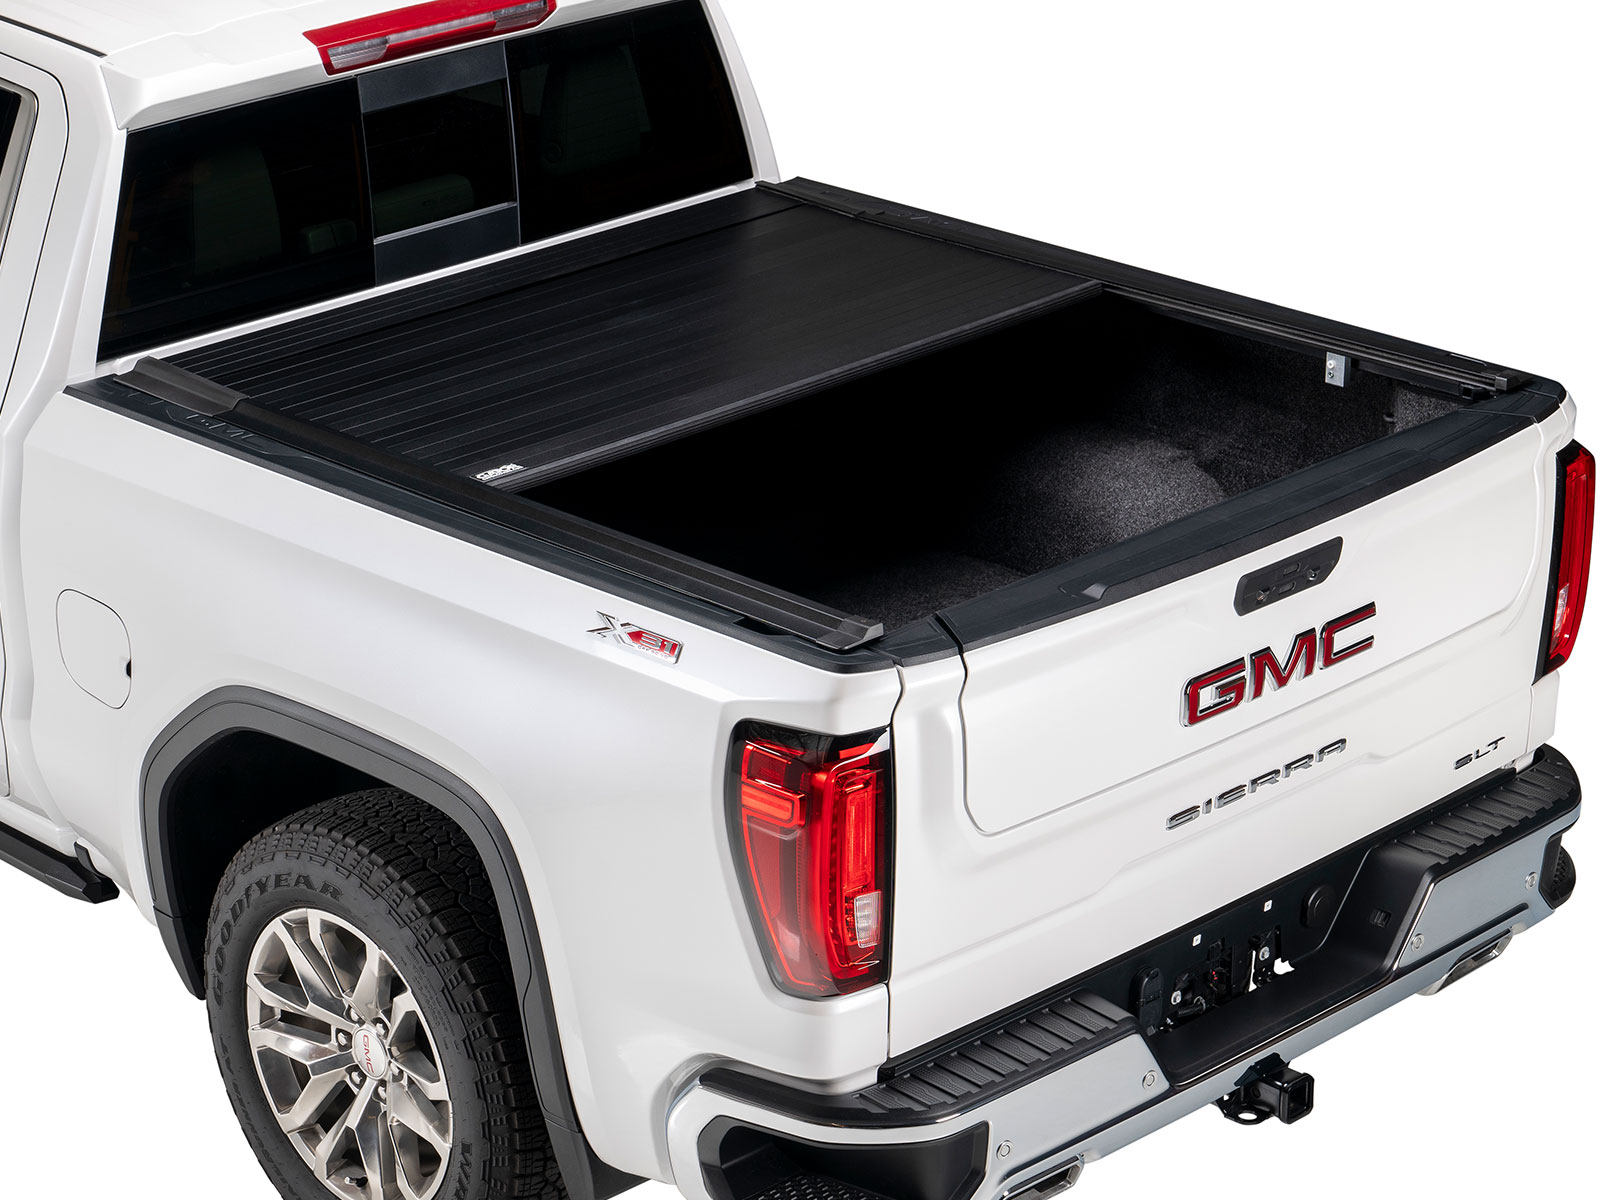 2010 Ford F150 Bed Covers & Tonneau Covers | RealTruck